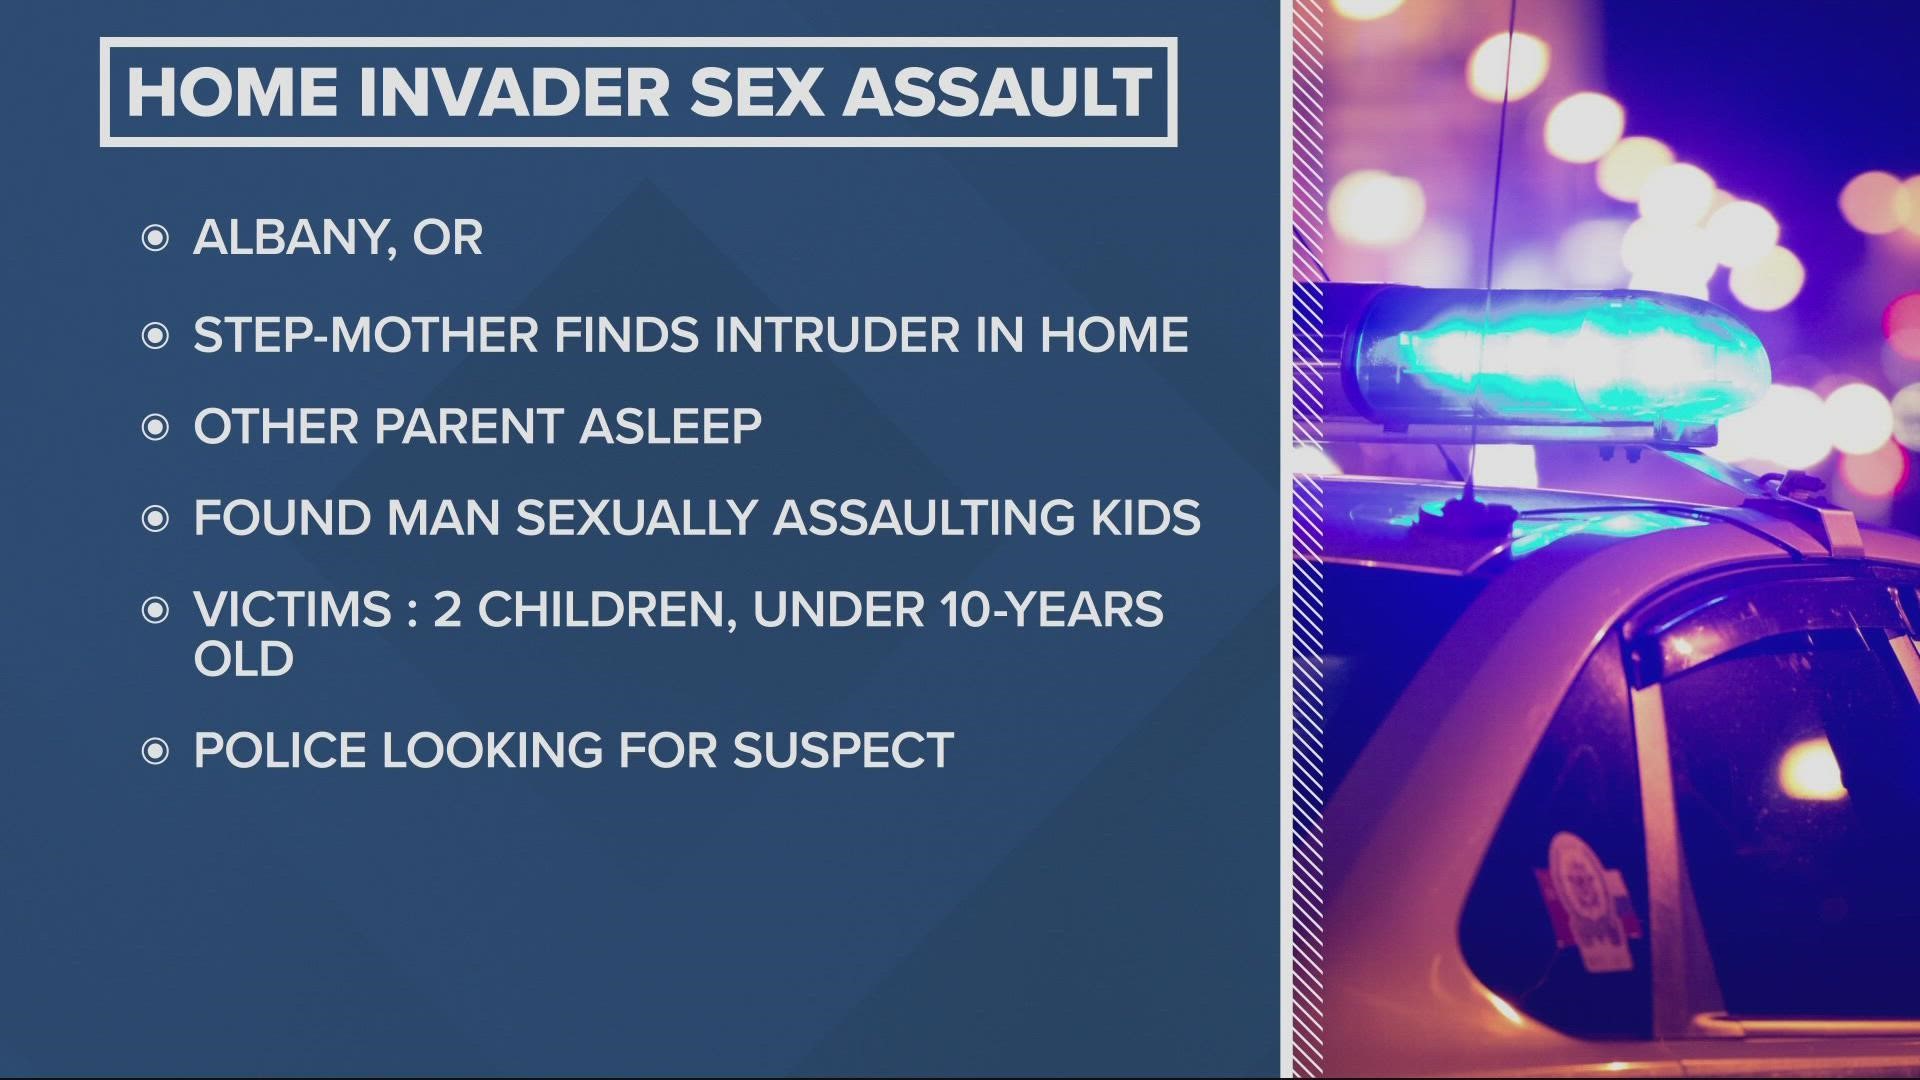 Albany police searching for home invasion, child sex assault suspect